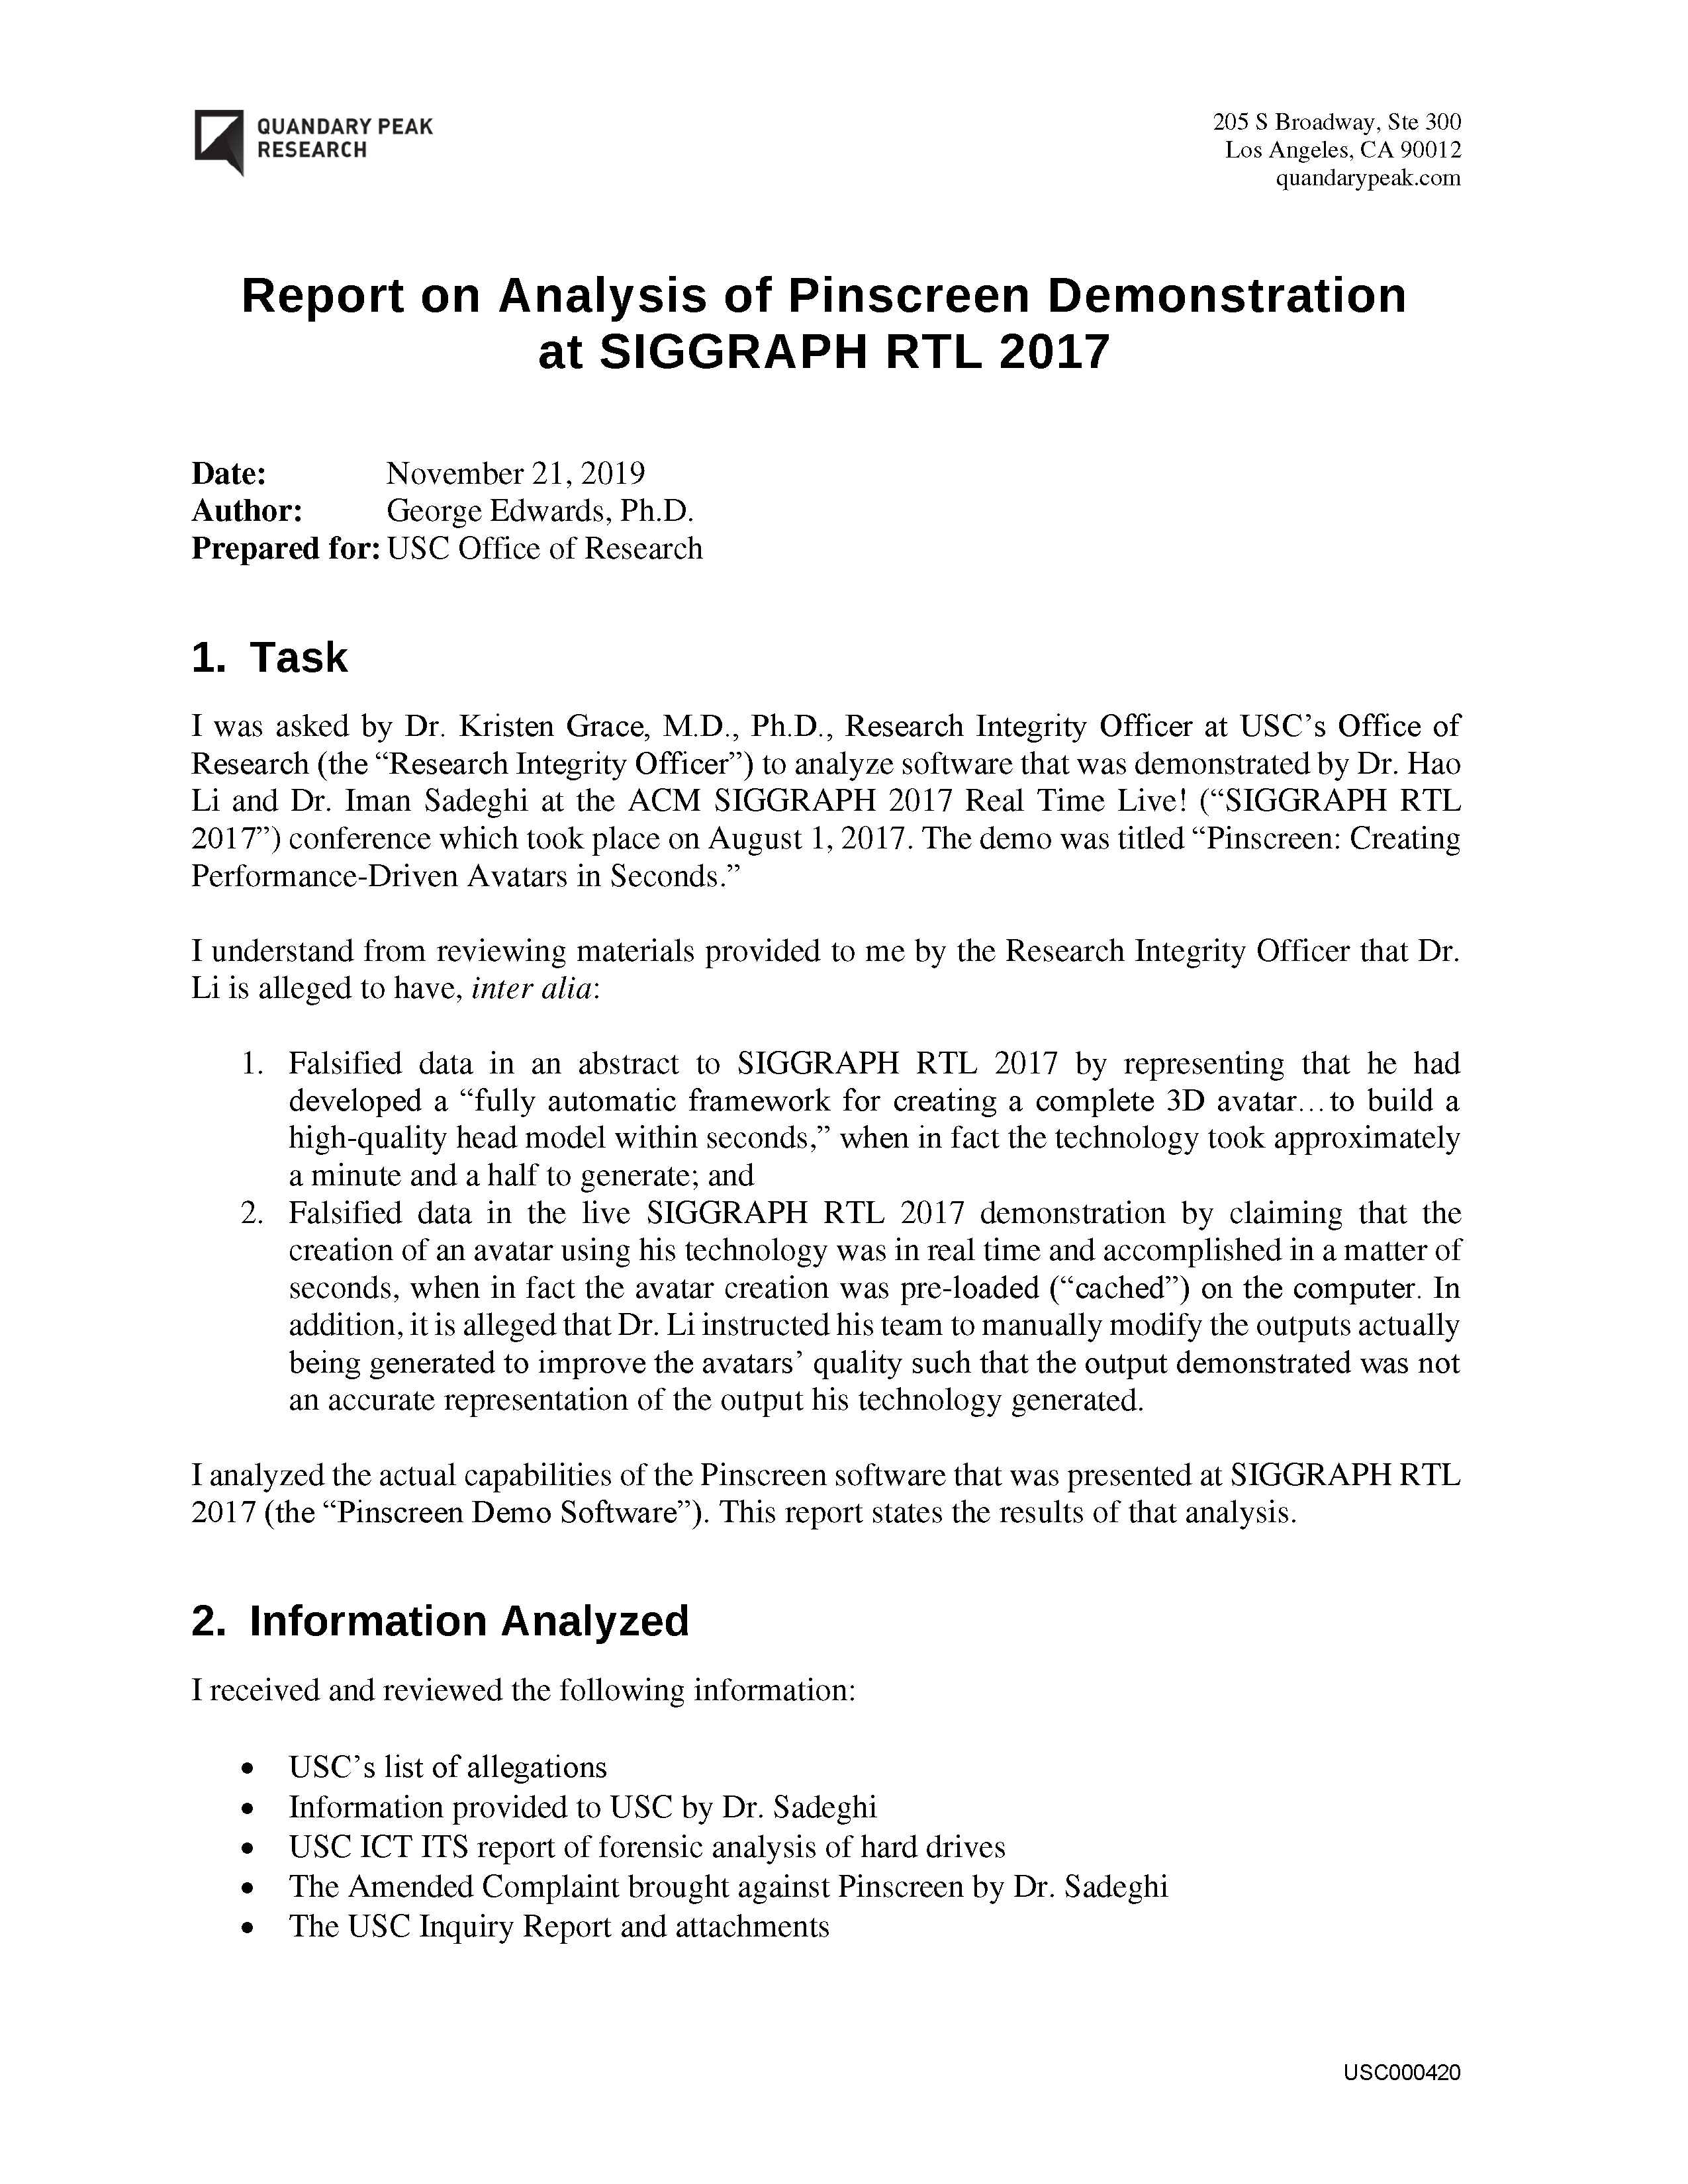 USC's Investigation Report re Hao Li's and Pinscreen's Scientific Misconduct at ACM SIGGRAPH RTL 2017 Page 422